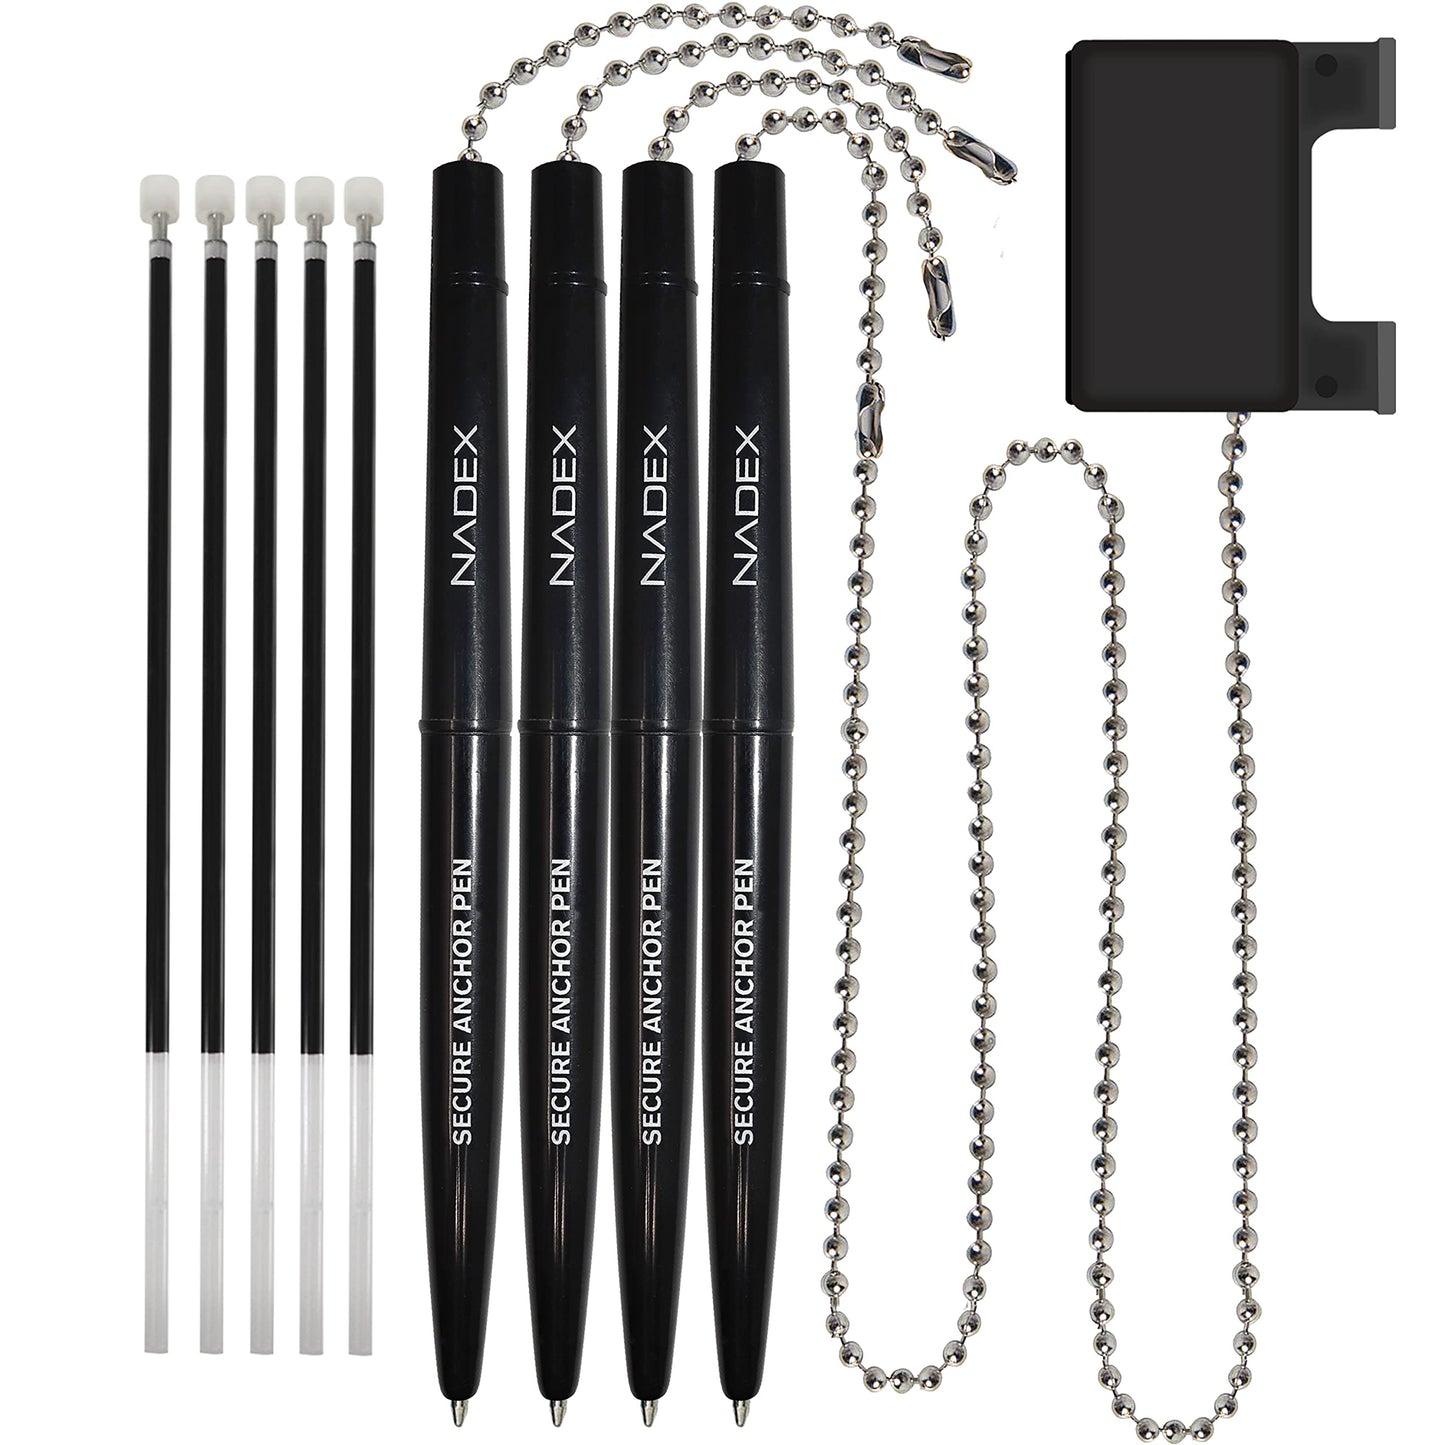 Ball and Chain Security Pen Set | 4 Pens, 1 Adhesive Mount, and 5 Refills (Black)